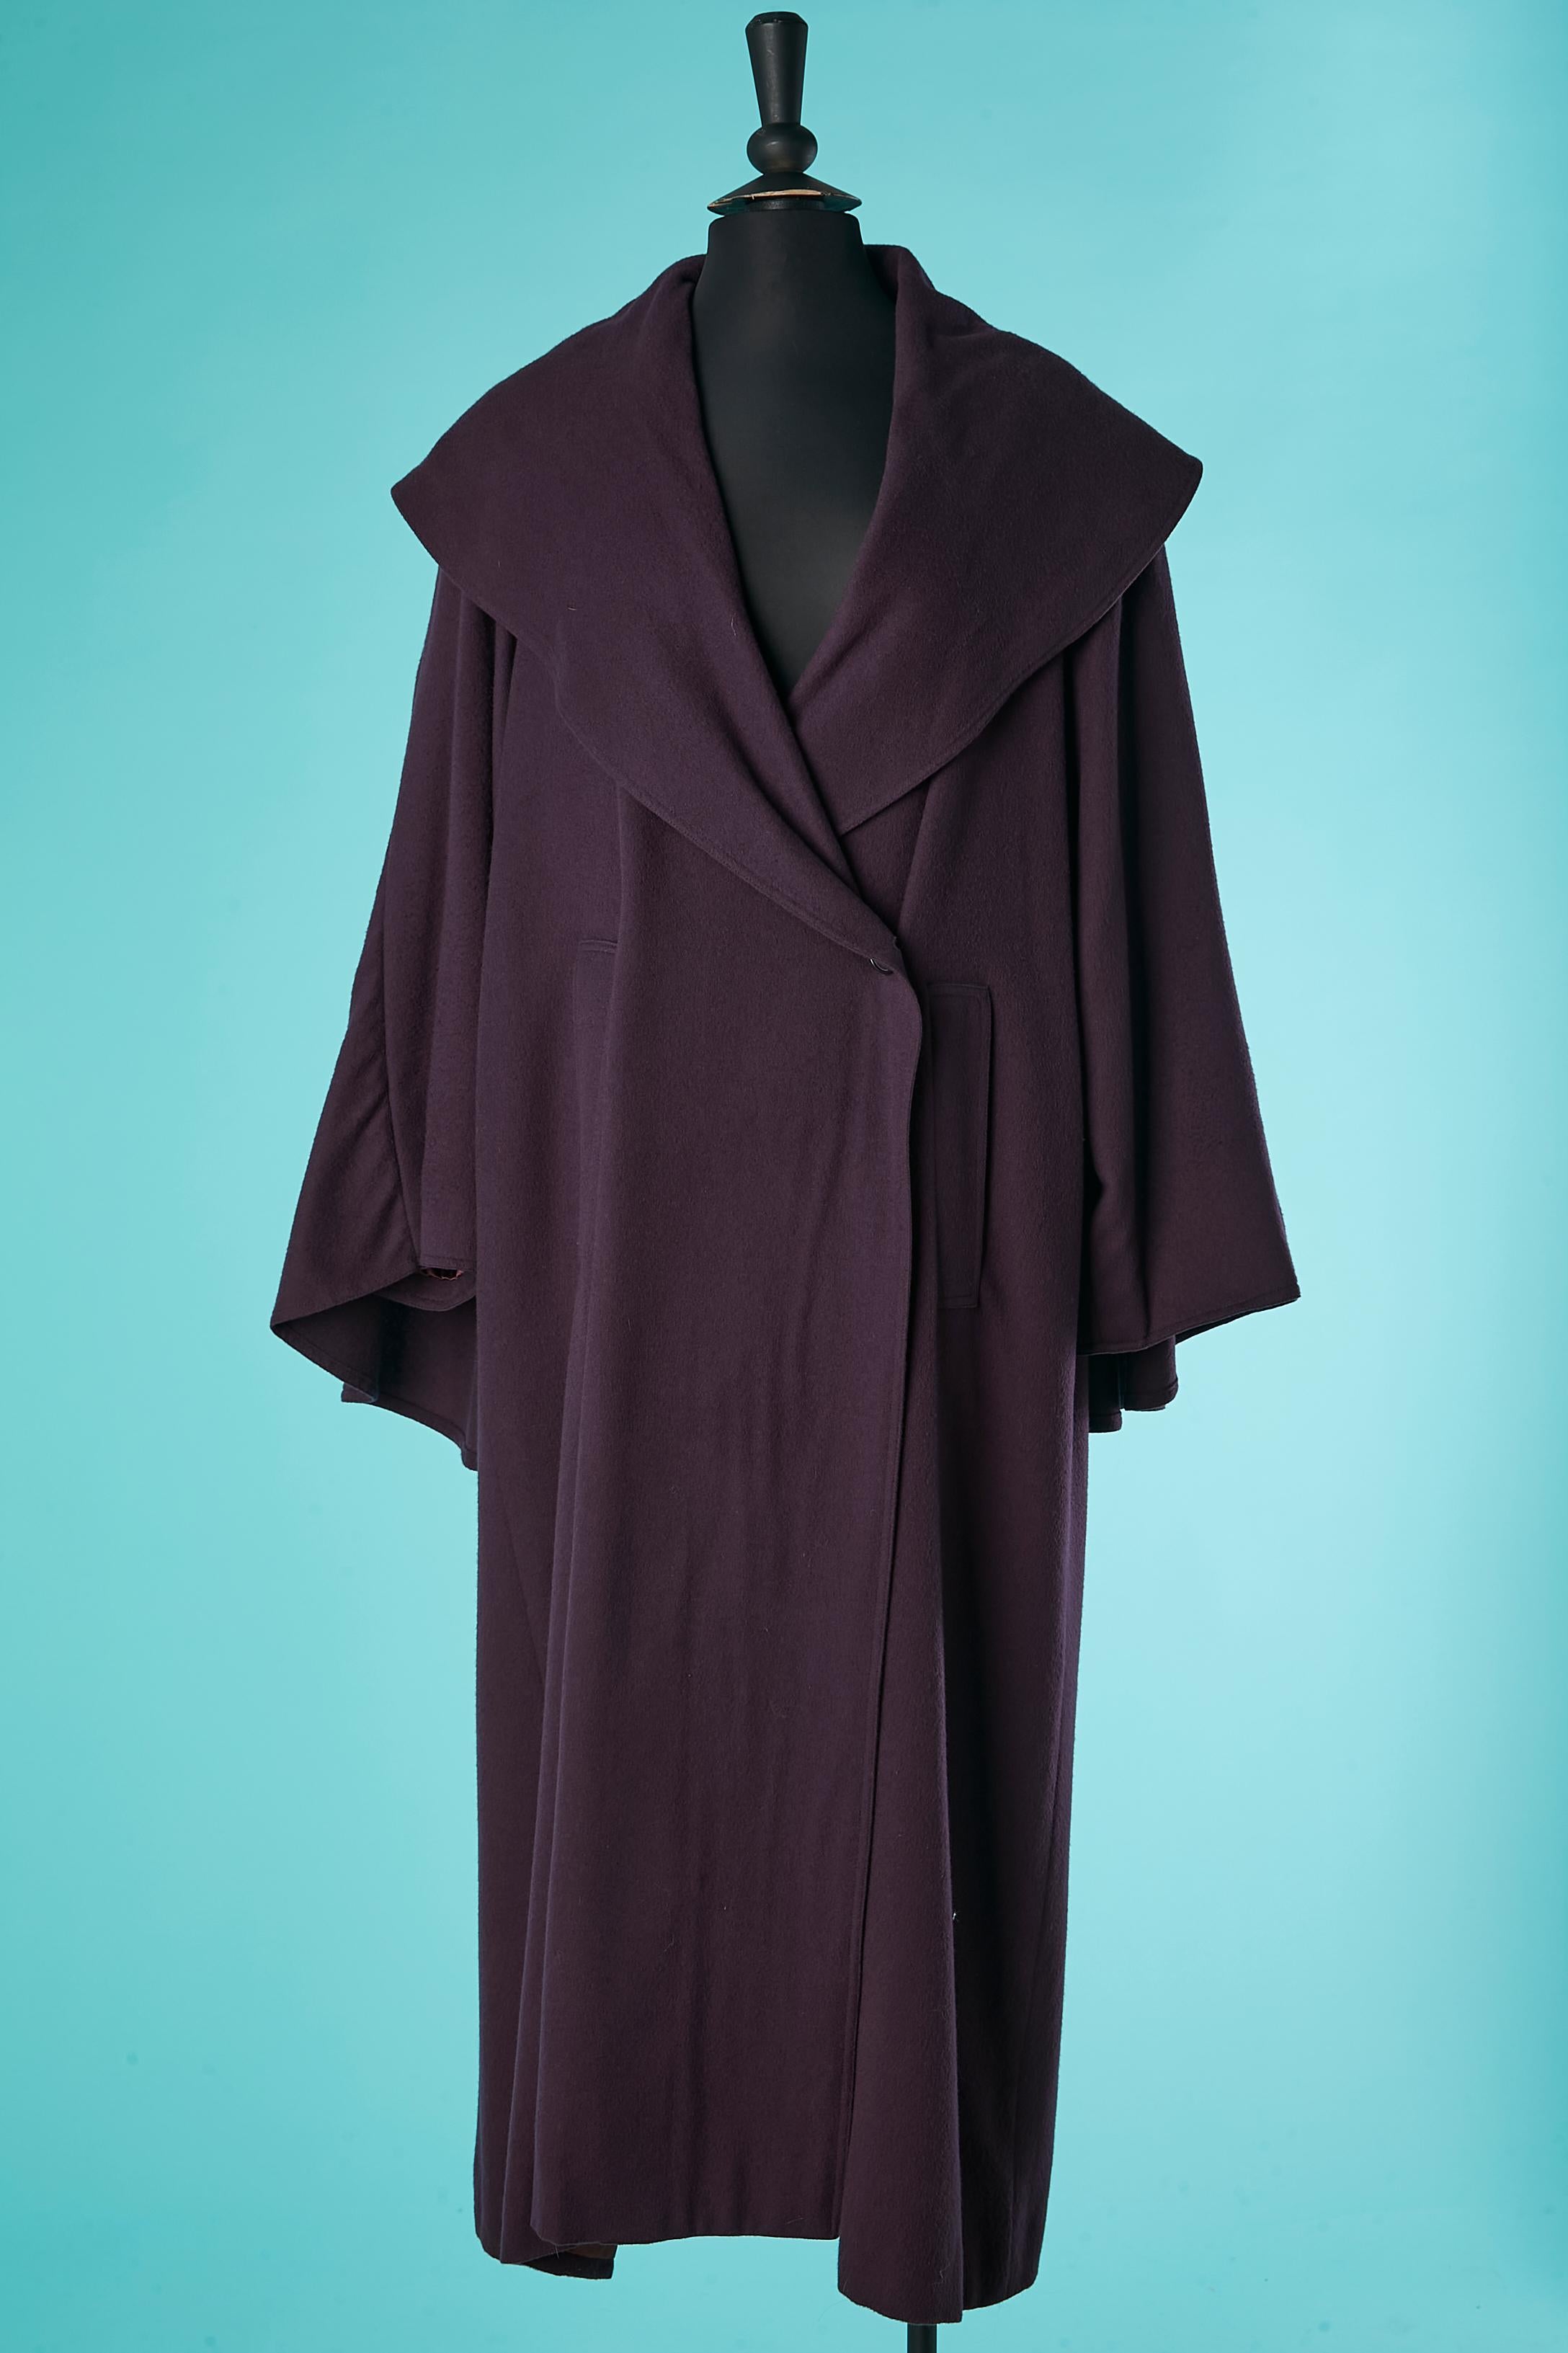 Double-breasted purple wool coat with cape on the back. Pocket on both side. Shoulder-pad. 
One hidden button and one visible button on the middle font . Burgundy satin lining. 
This coat could be by  K Lagerfeld who design Chloé Collection from